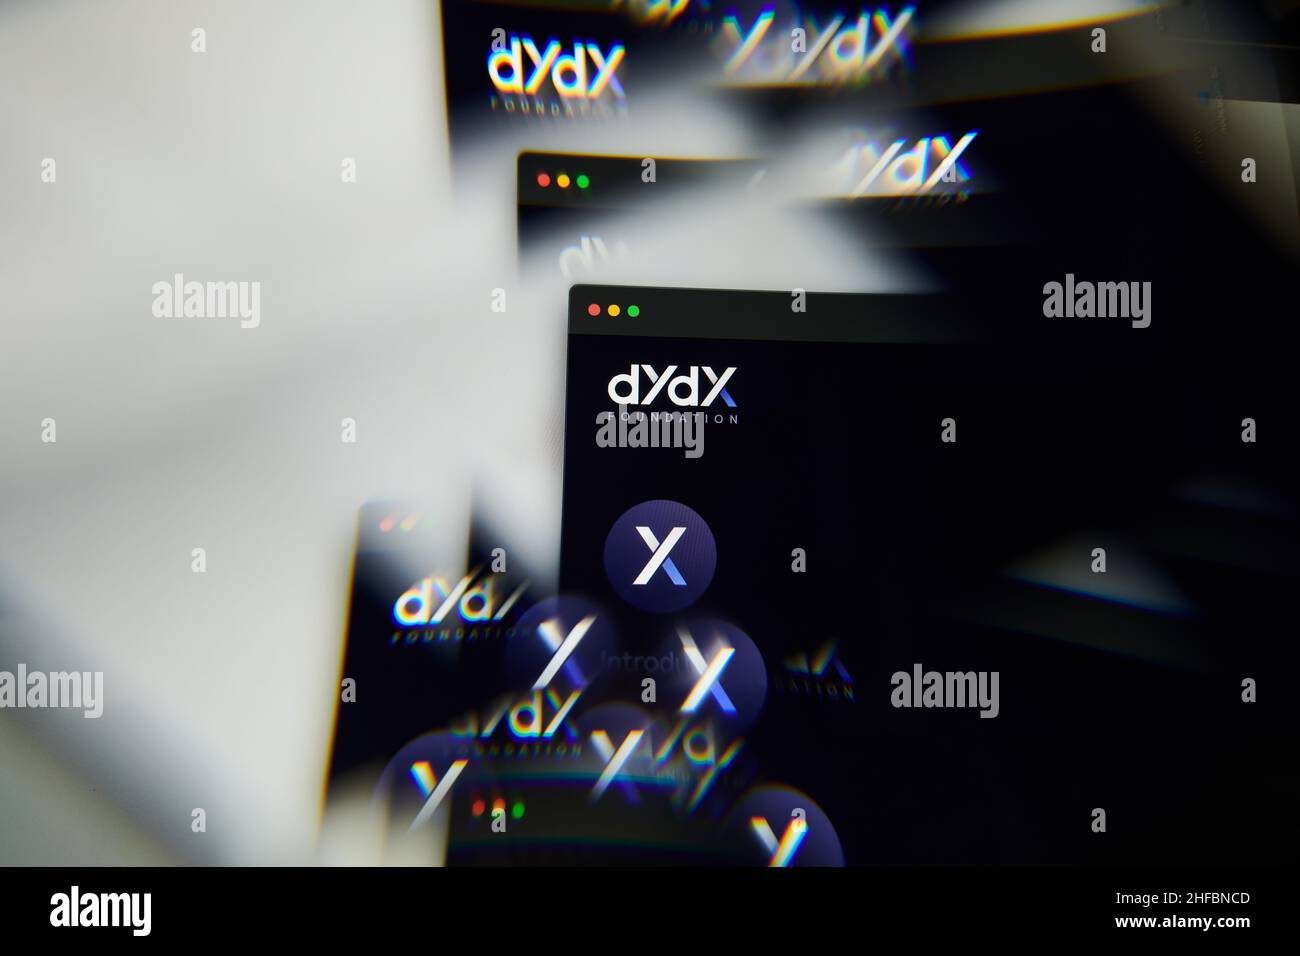 Milan, Italy - January 11, 2022: dydx - DYDX logo on laptop screen seen through an optical prism. Dynamic and unique image form dydx, DYDX coin websit Stock Photo